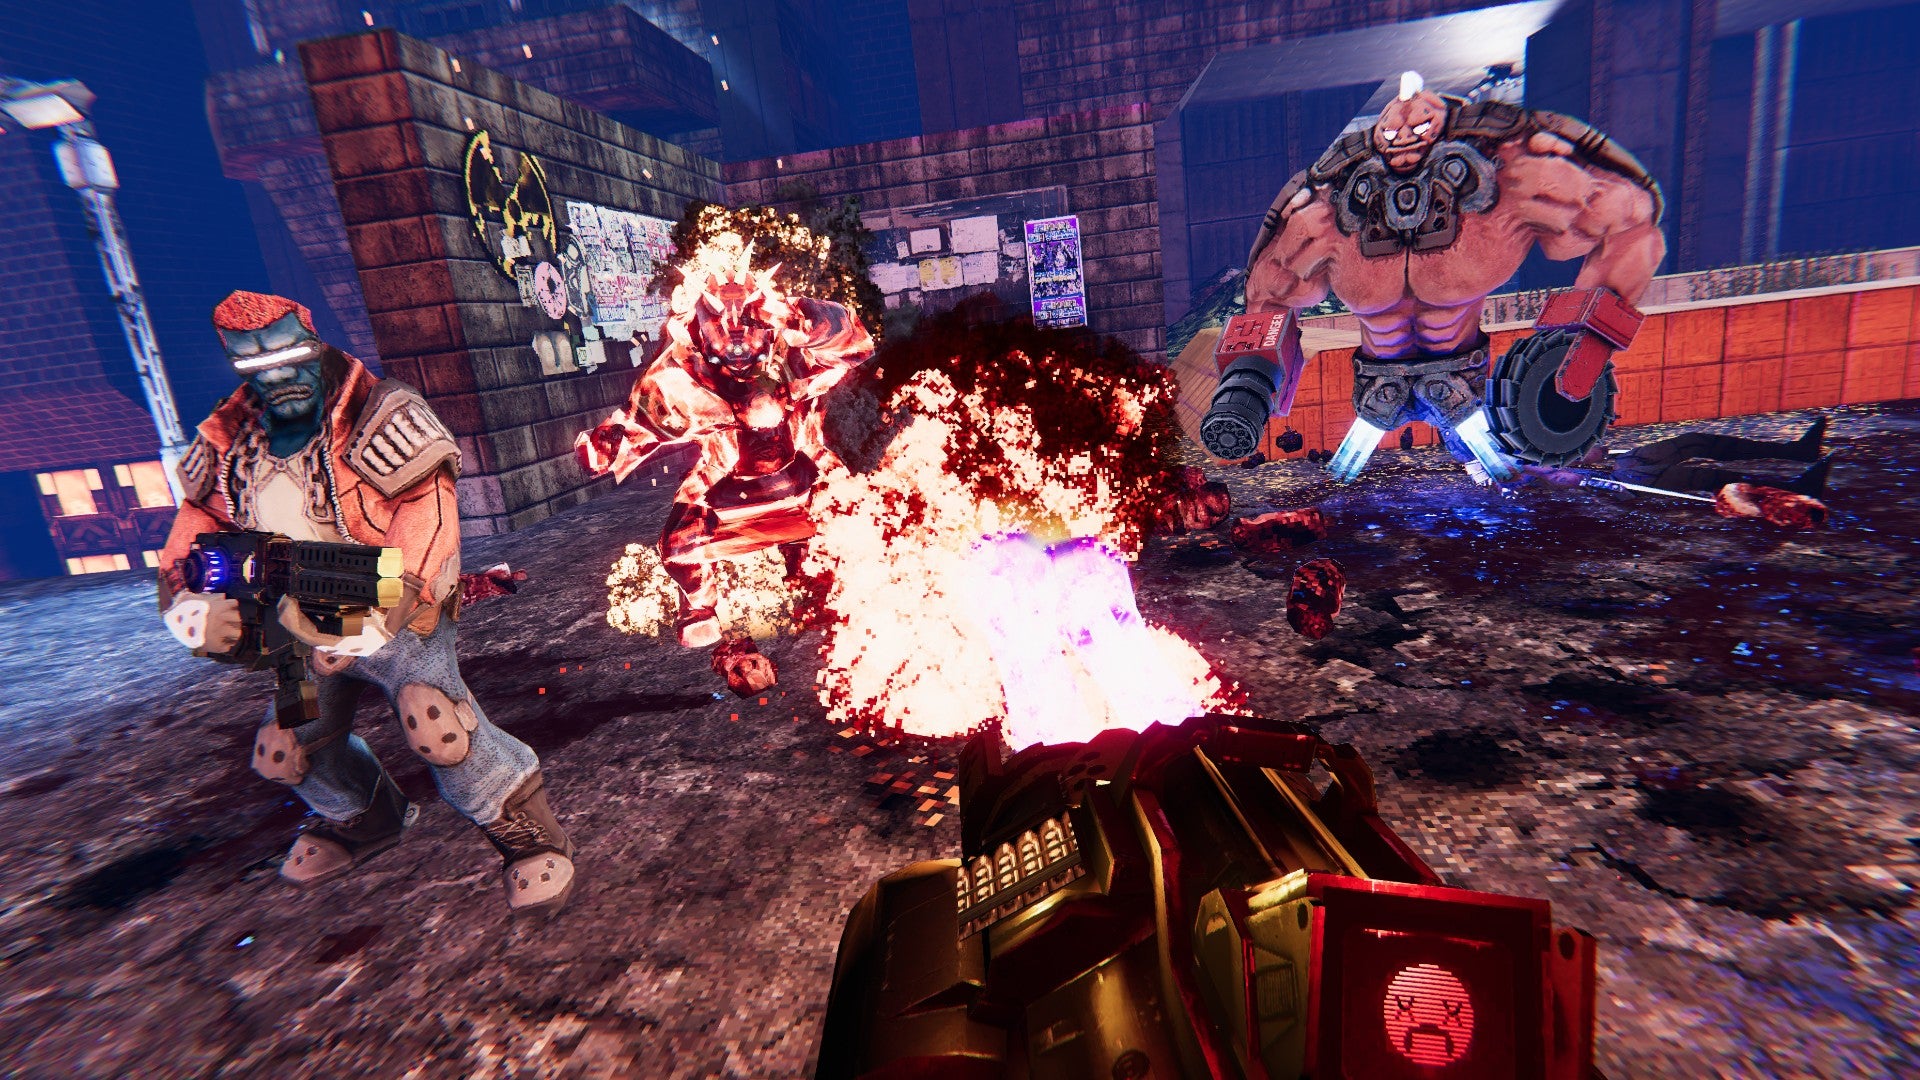 Player spews flames from a flamethrower towards three beefy grunts in Turbo Overkill.